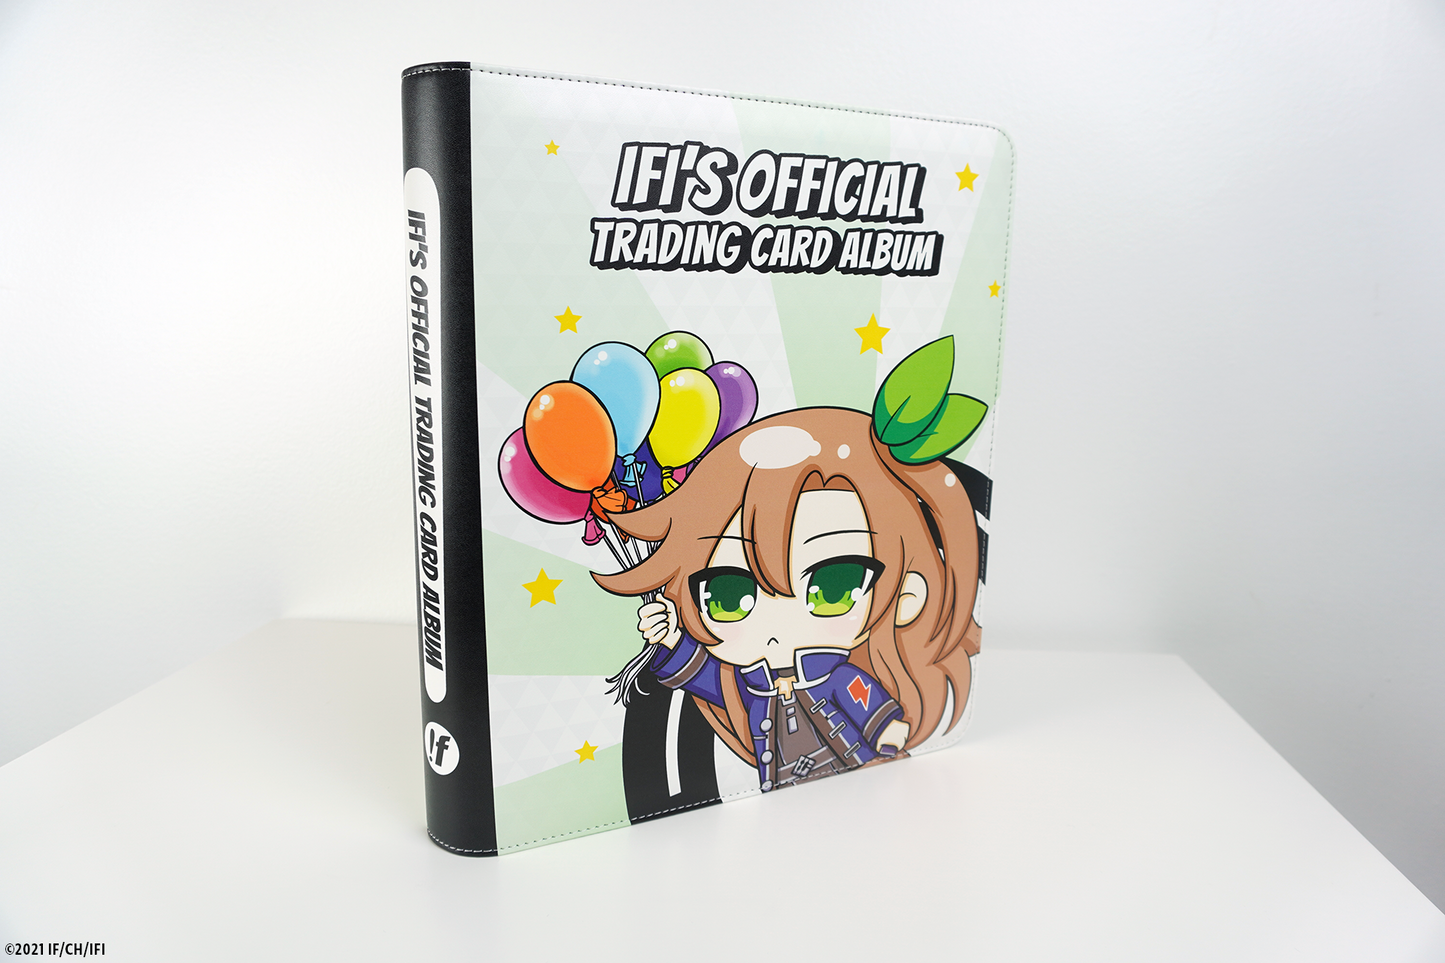 IFI's Online Store Official Trading Card Album